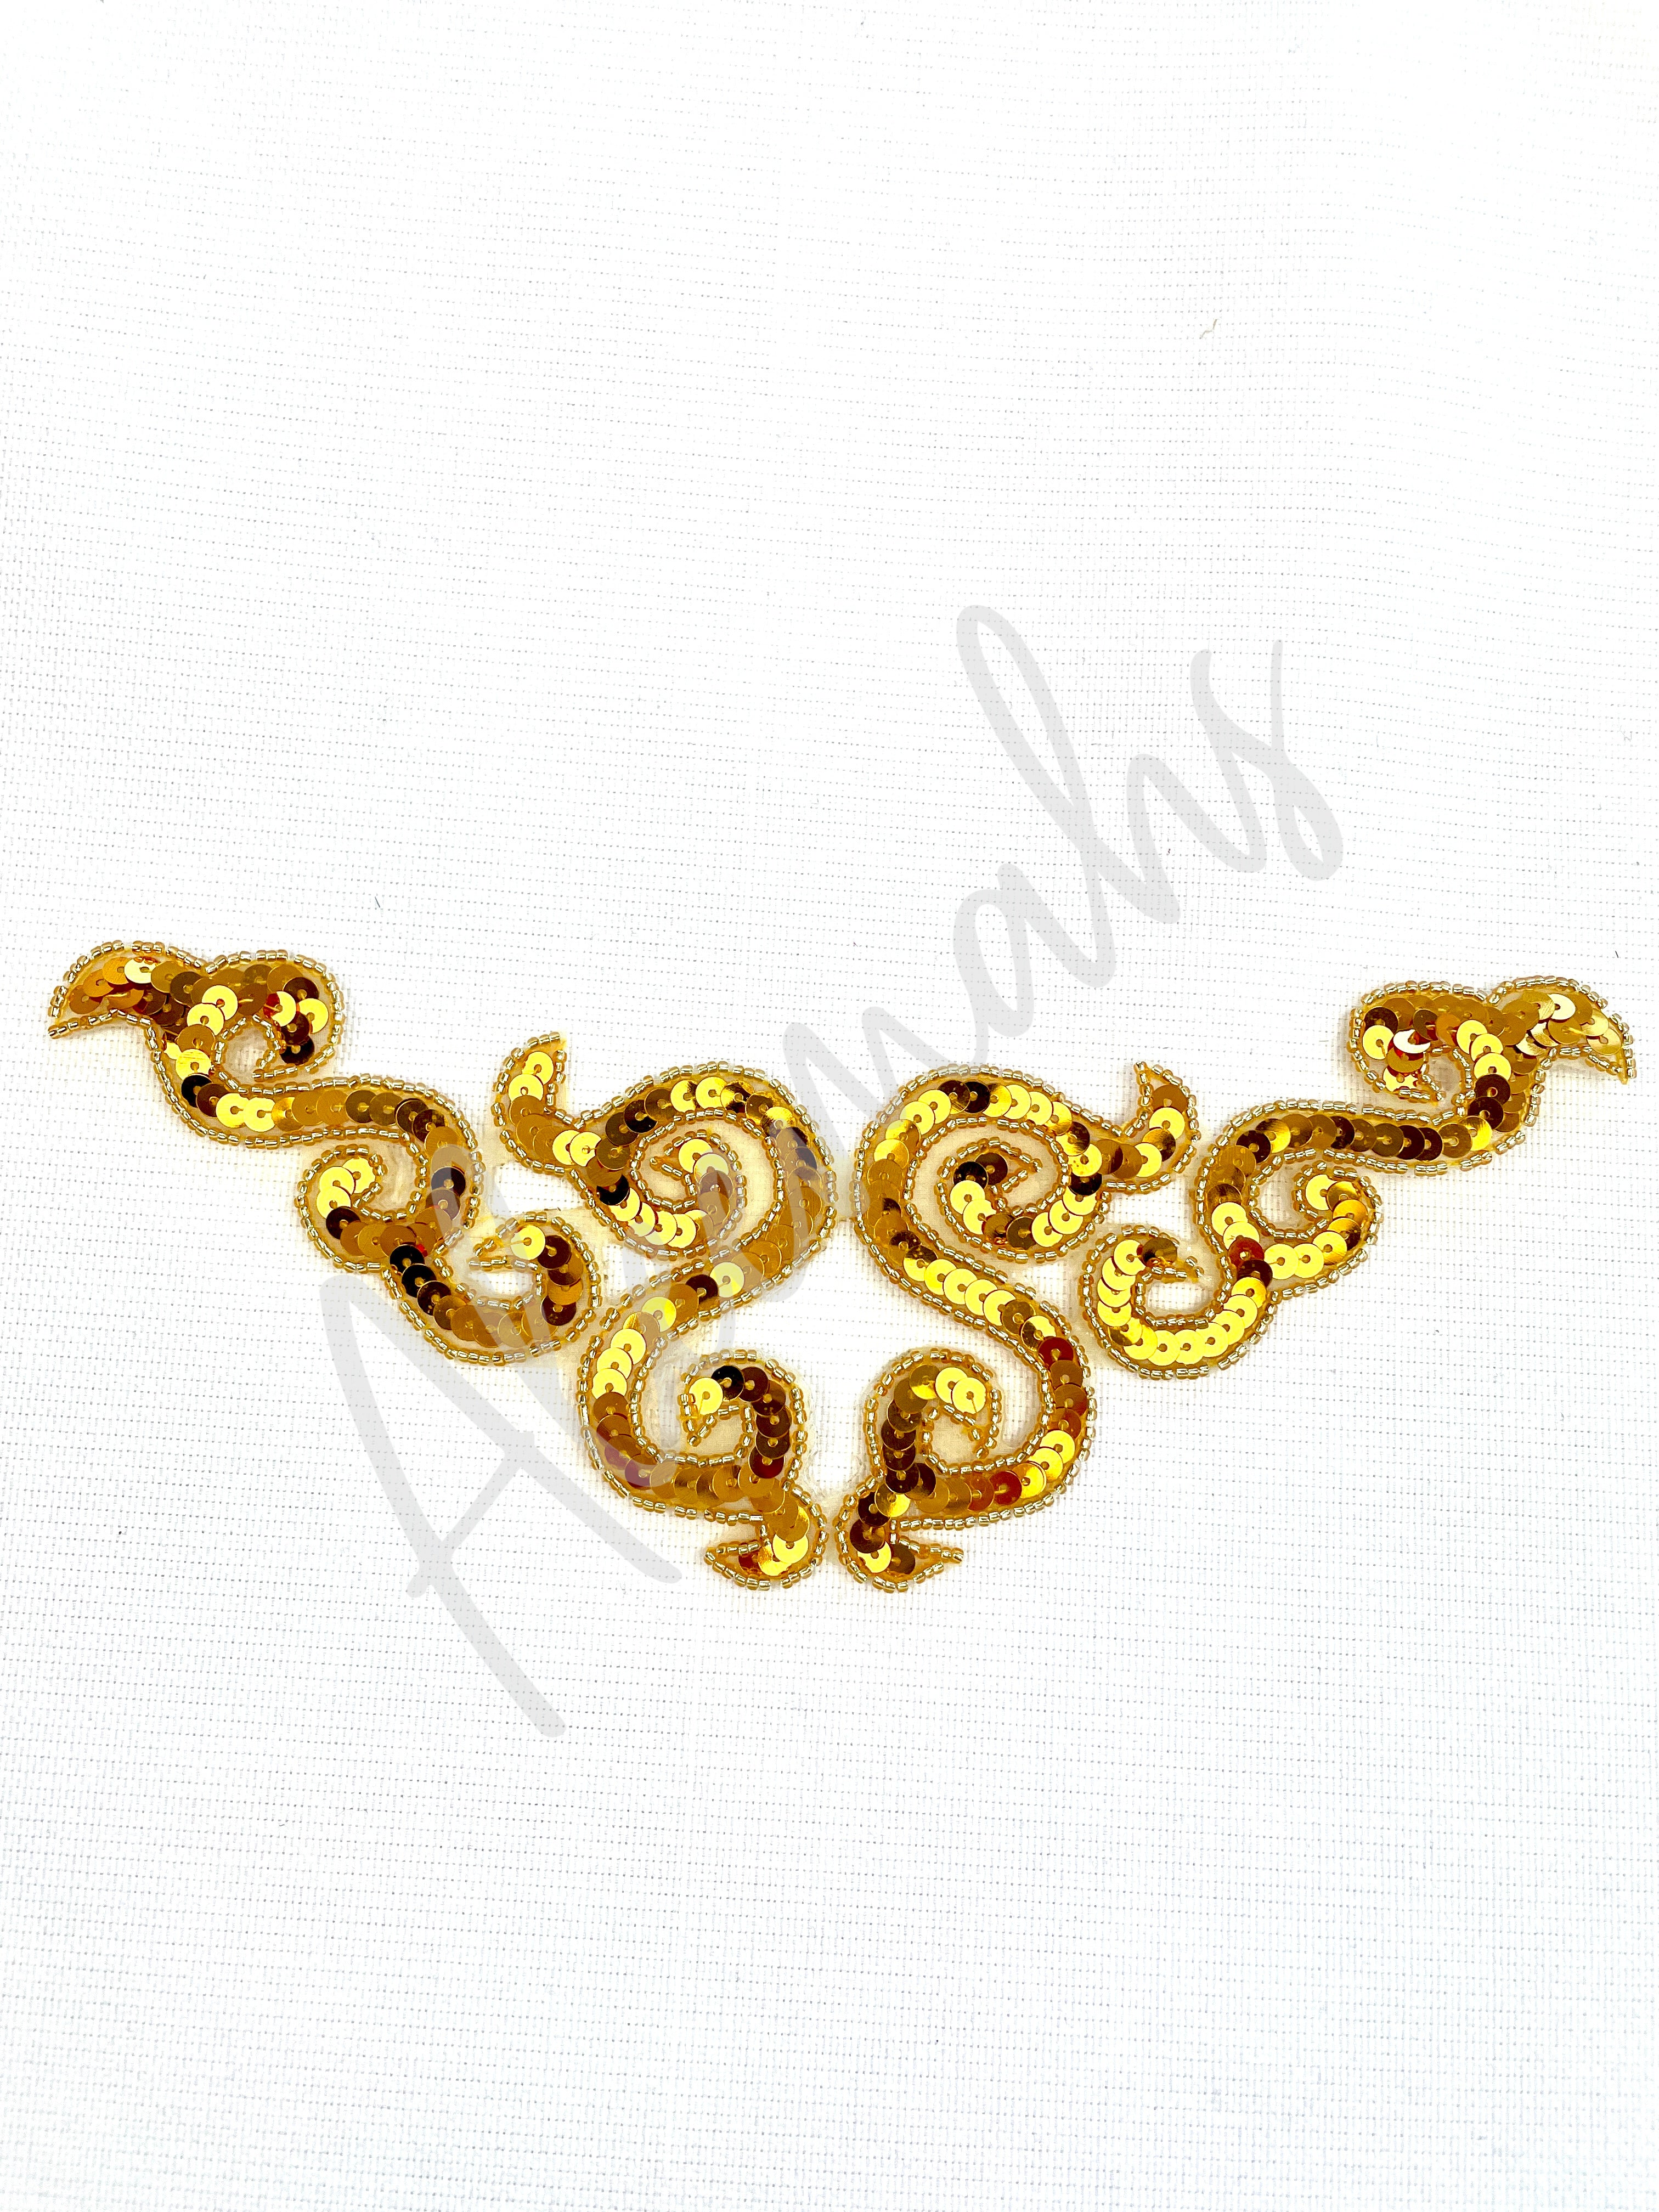 A-107: Gold sequin and bead applique